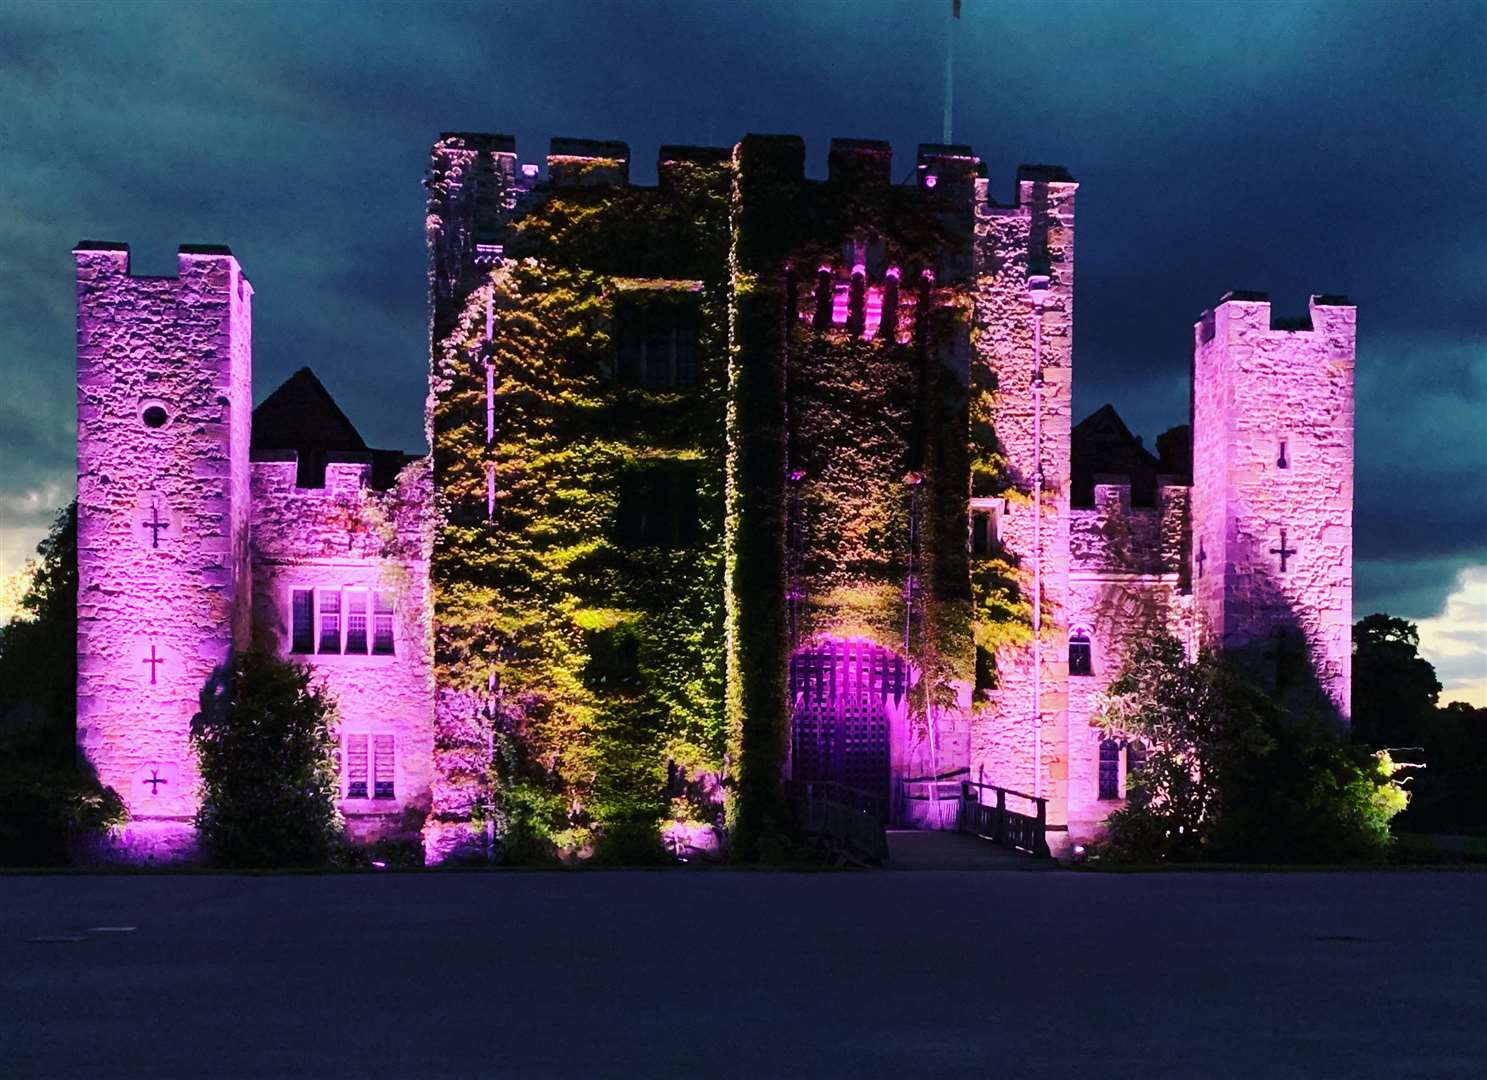 The backdrop to most performances at the Hever Bitesize Festival will be the castle in pink